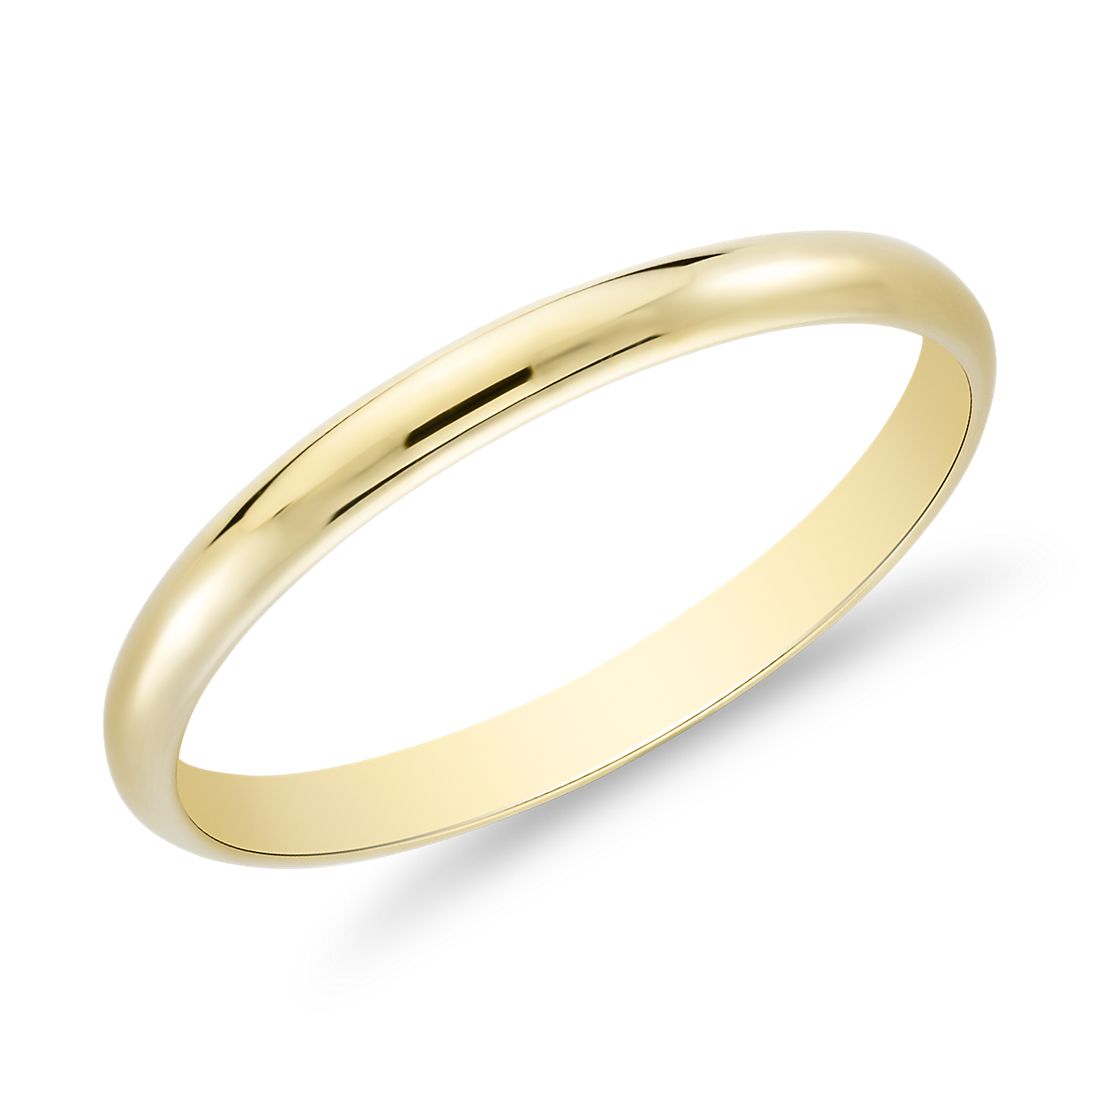 14K Gold Two-Tone 1.8MM COMFORT-FIT WEDDING BAND